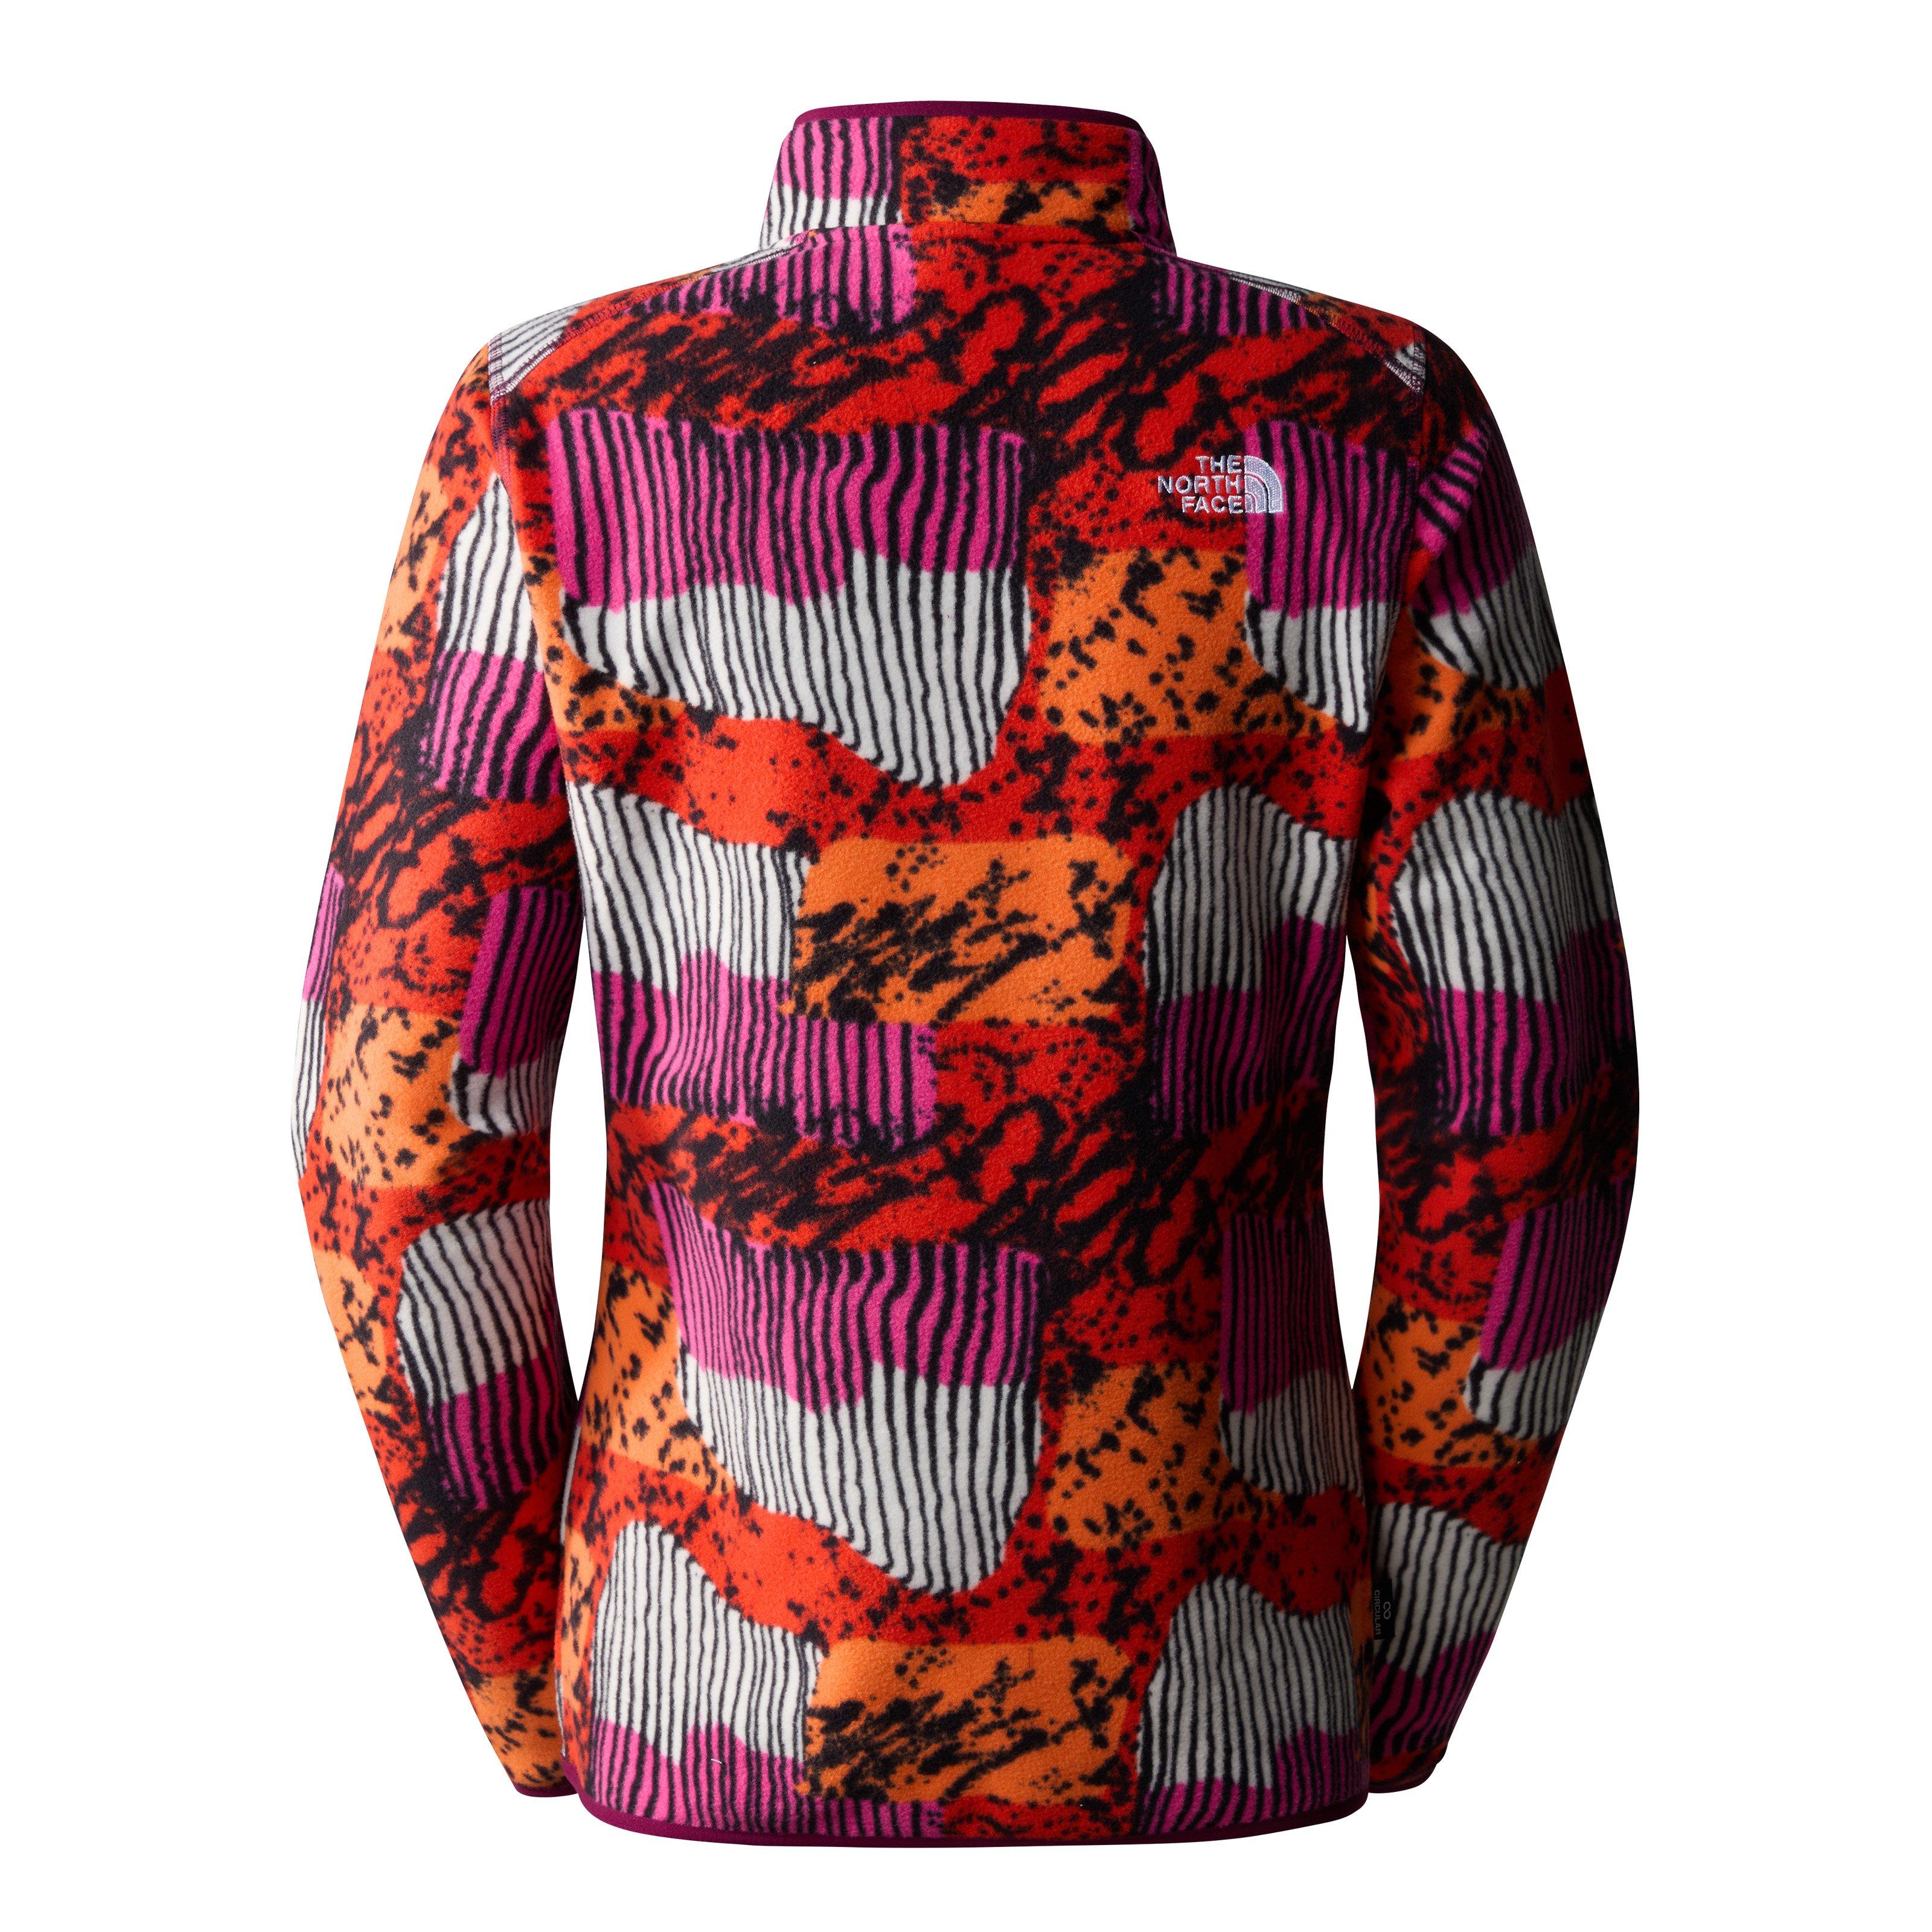 The Yosemite George Printed Fiery Zip Fleece Face Red | Women\'s - Fisher 100 Glacier North 1/4